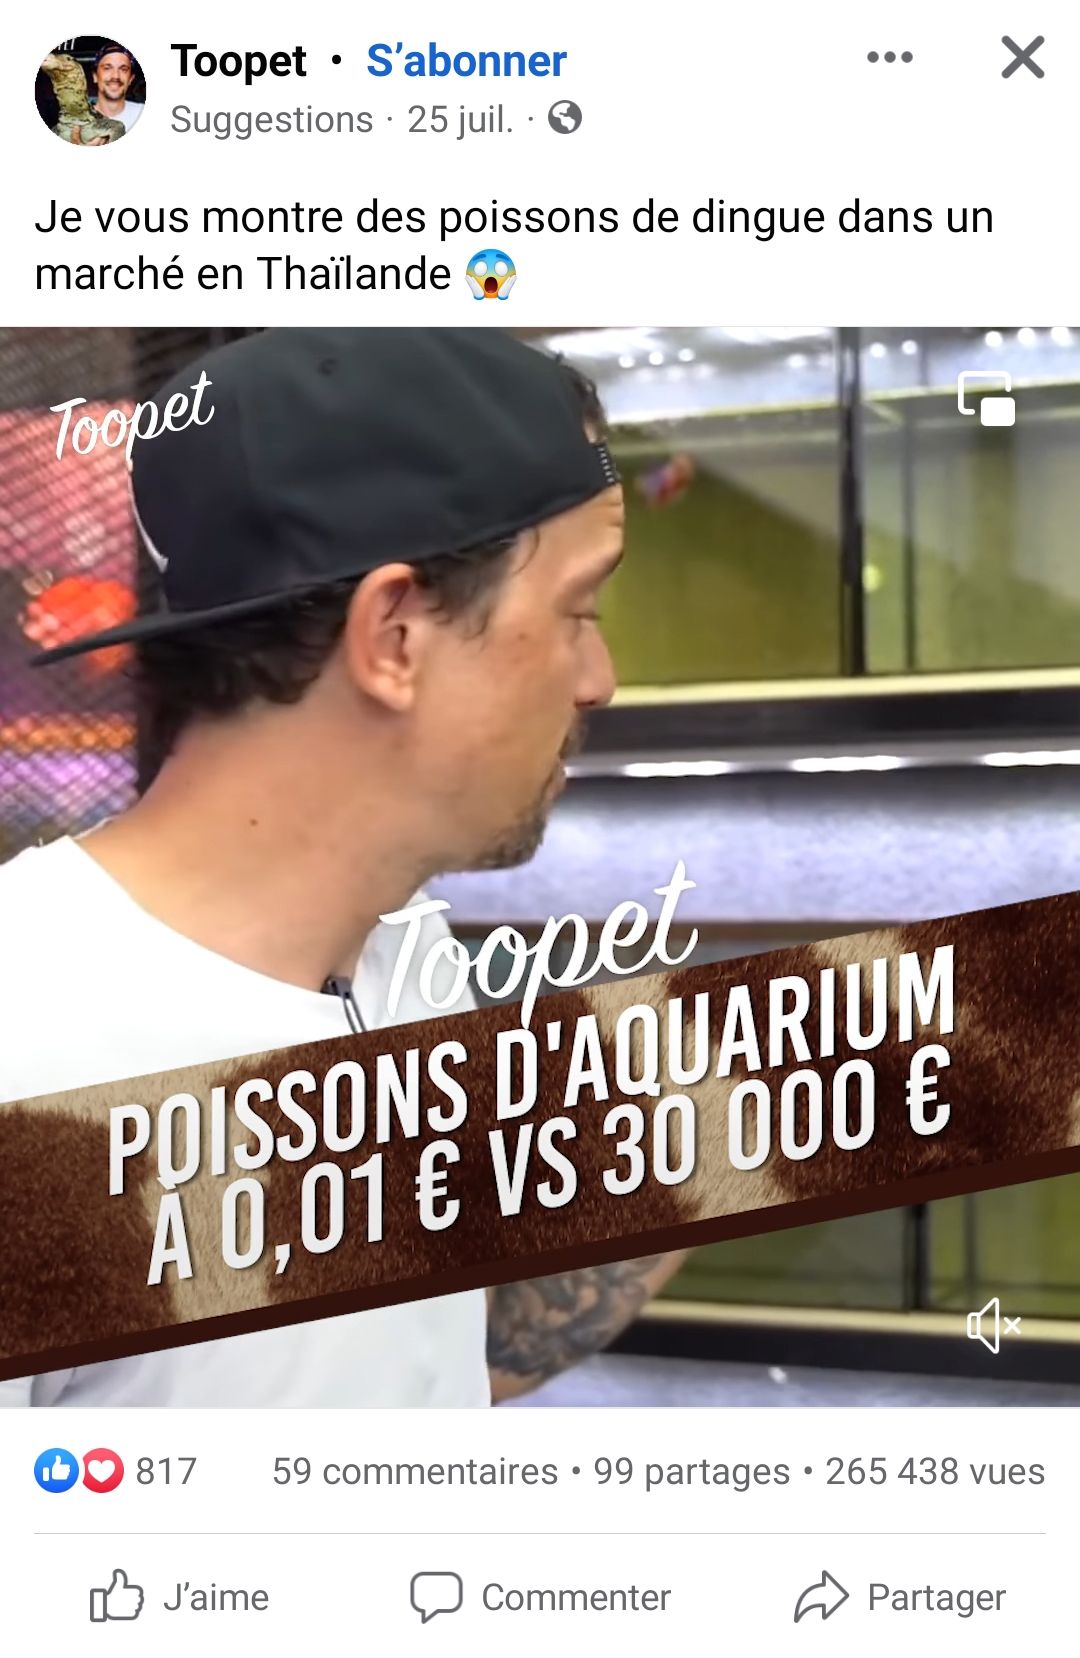 Video thumbnail: pet fishs, from $0.01 to $30,000